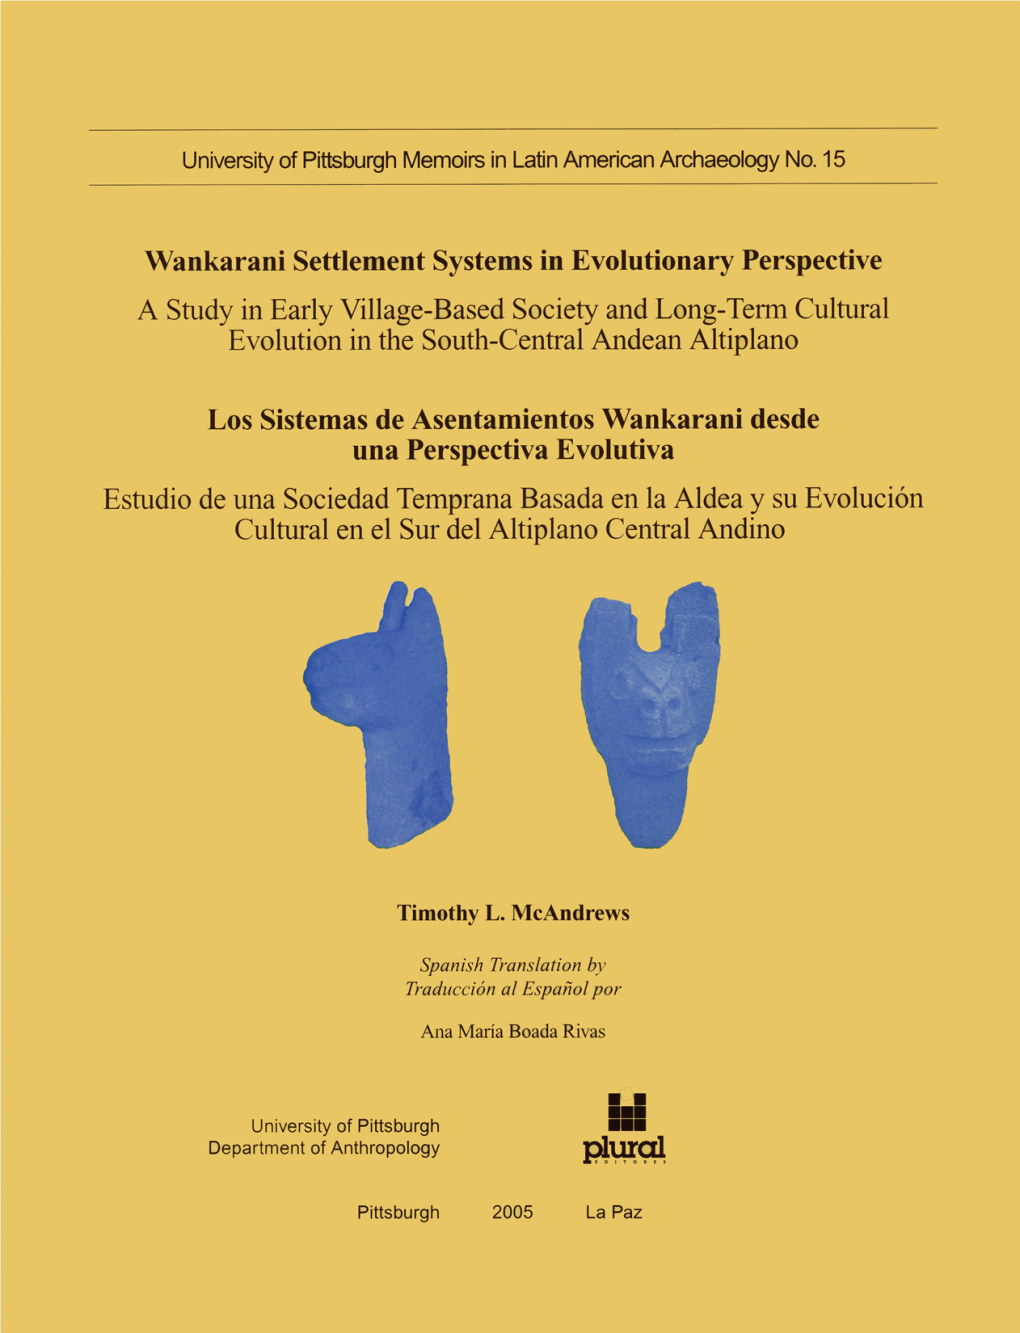 Wankarani Settlement Systems in Evolutionary Perspective a Study in Early Village-Based Society and Long-Term Cultural Evolution in the South-Central Andean Altiplano